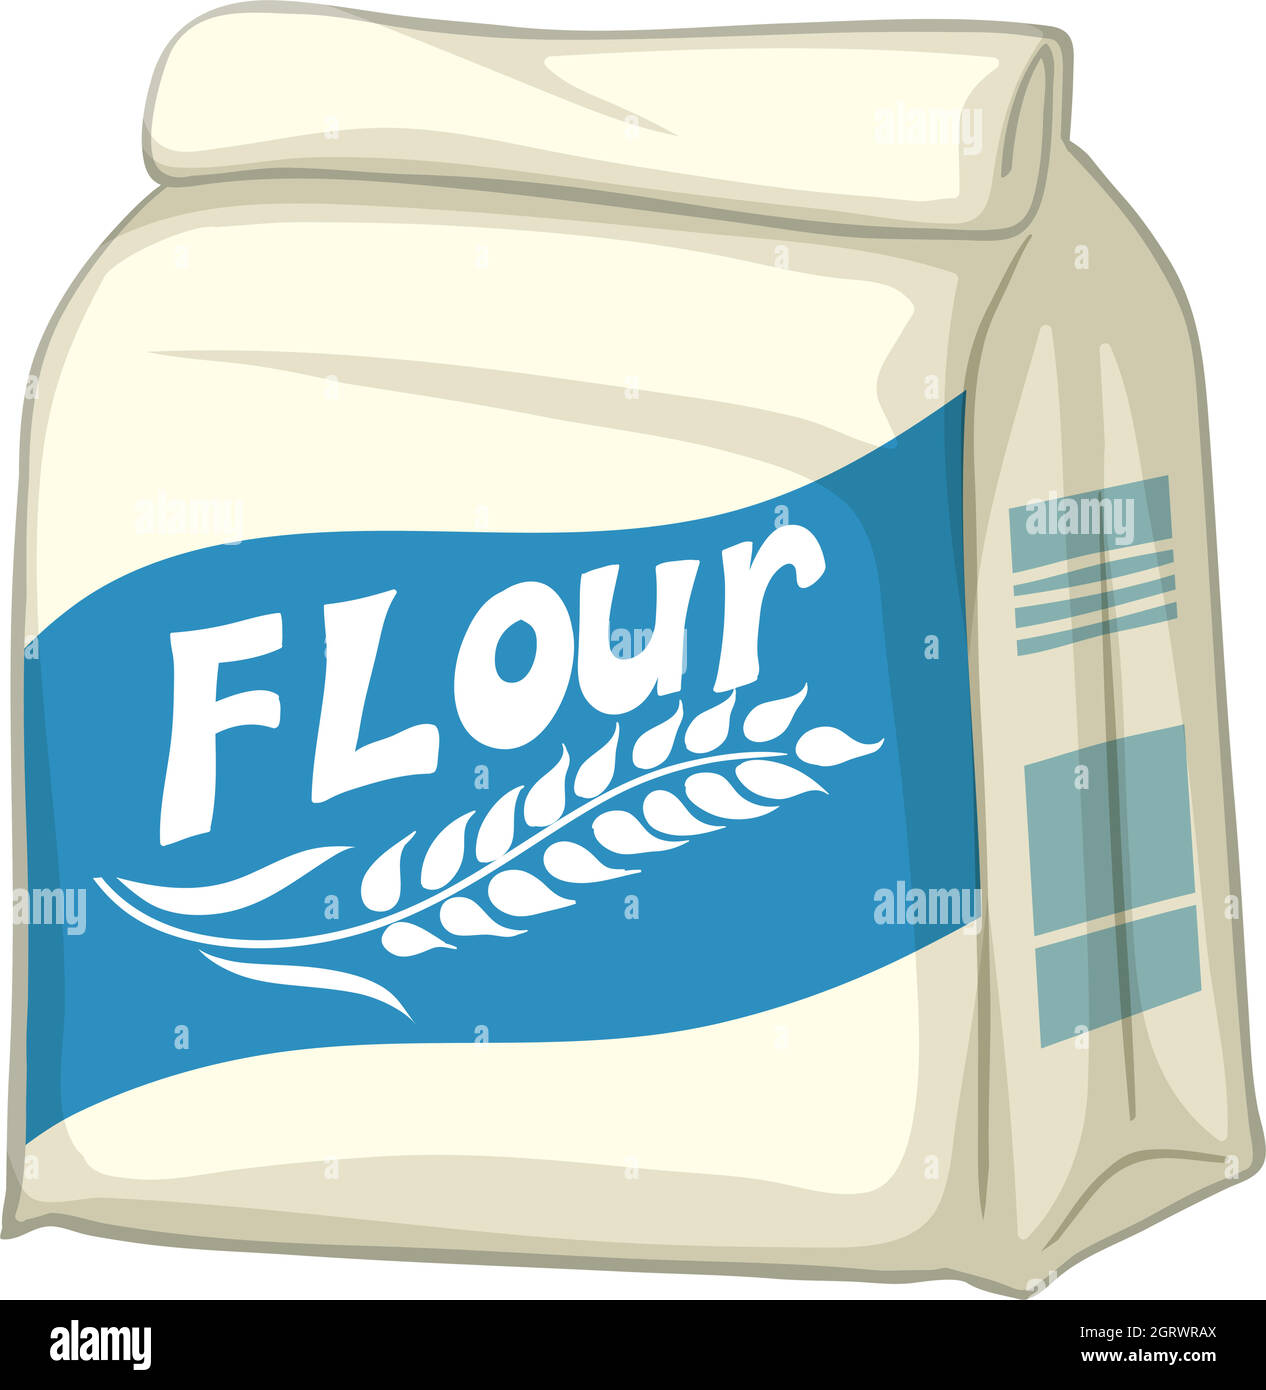 Cartoon bag of flour Cut Out Stock Images & Pictures - Alamy